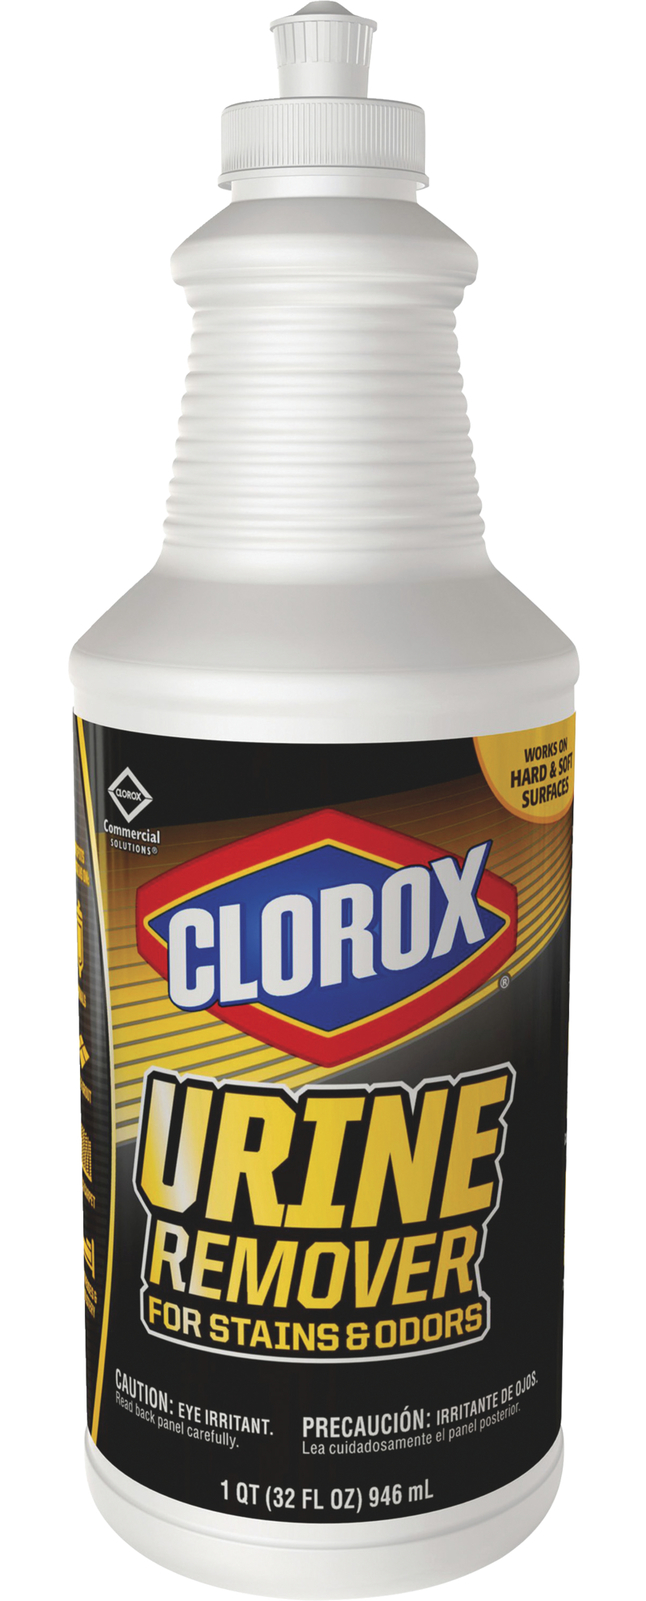 Clorox Commercial Solutions Urine Remover, Item Number 2027147